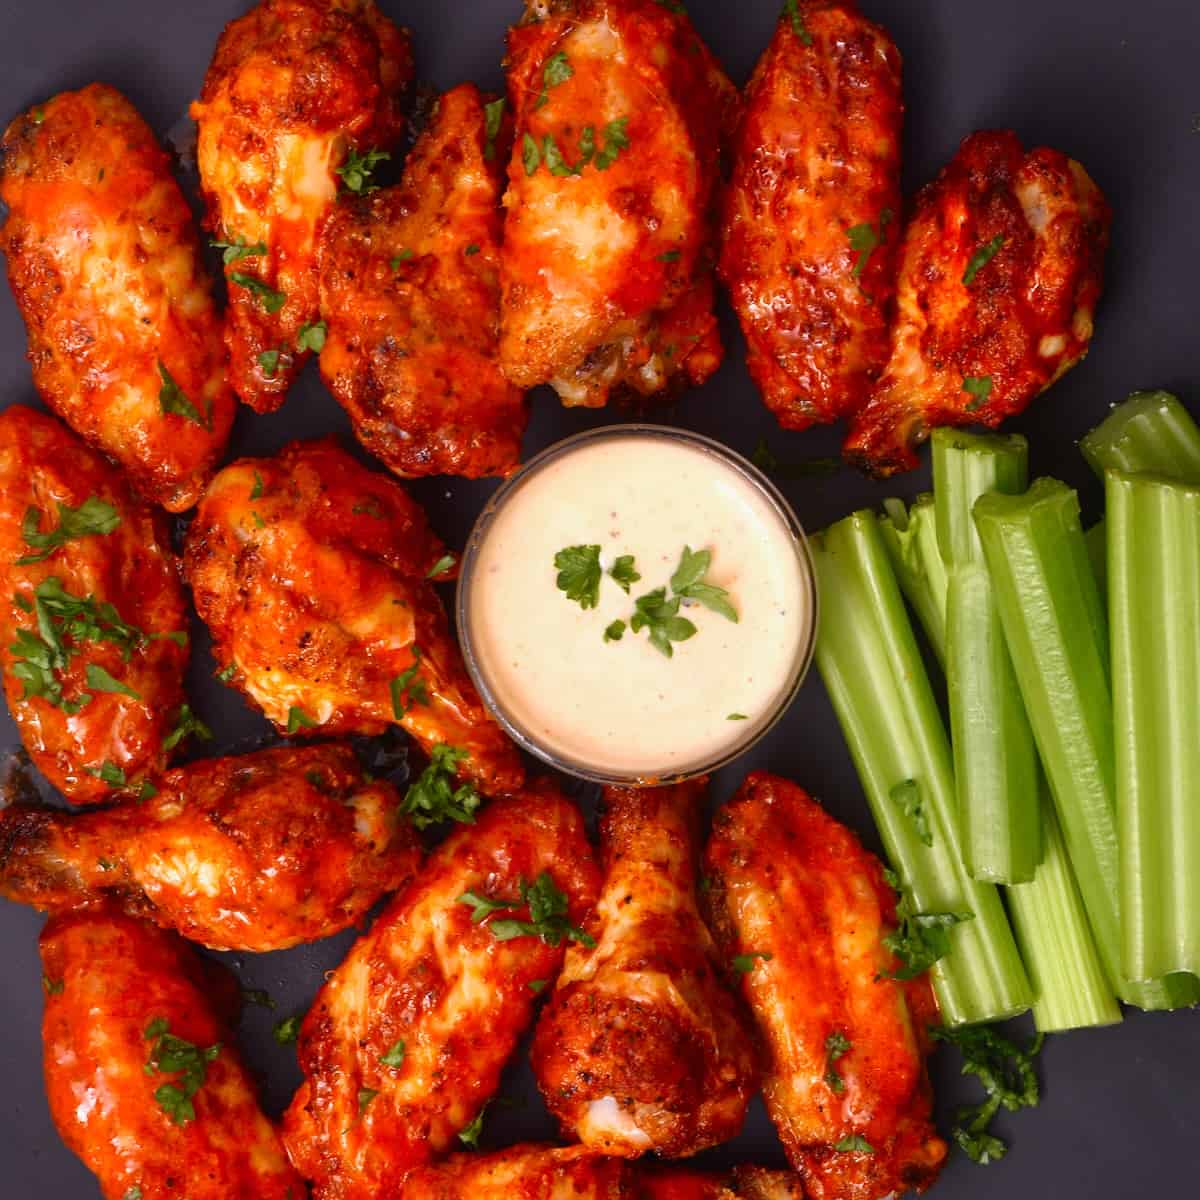 Air fryer buffalo chicken wings with dipping sauce and celery sticks